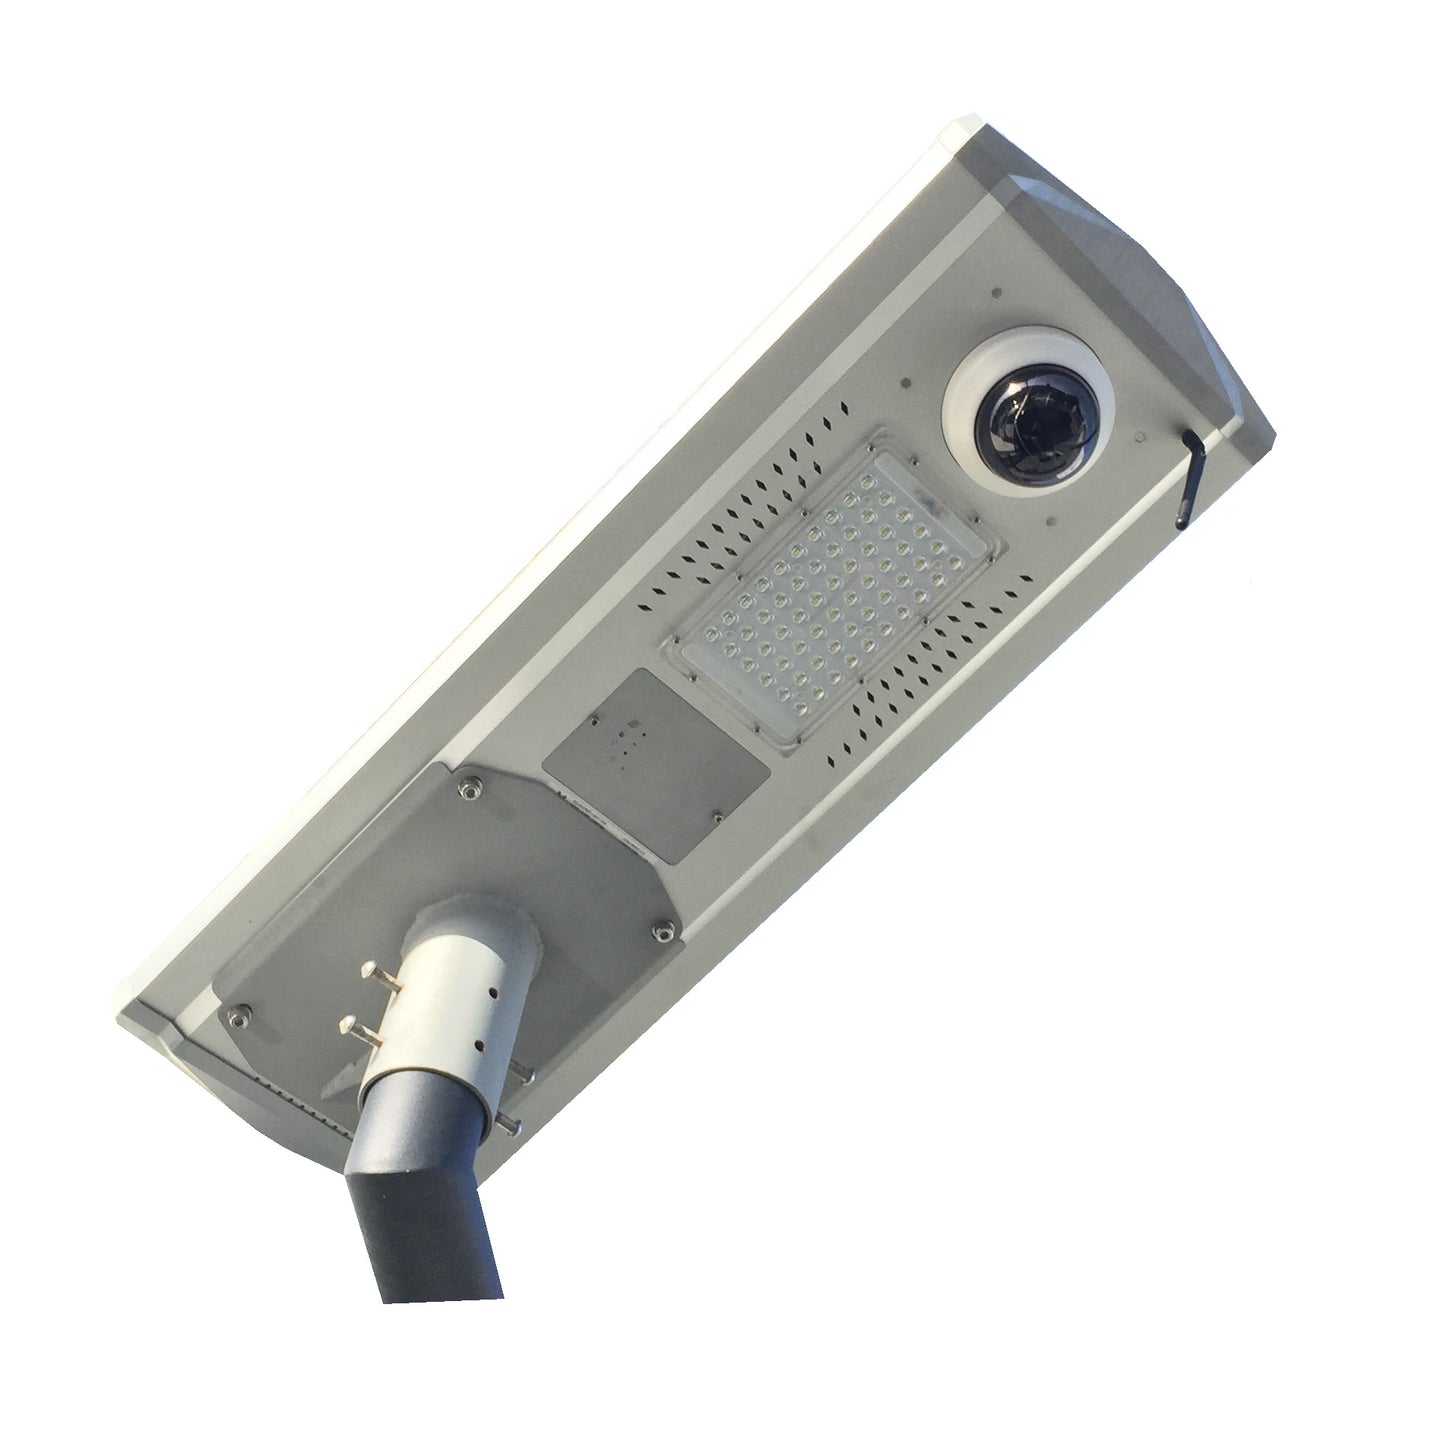 SERIES II - (All-In-One) 15W Street Light with IP Camera